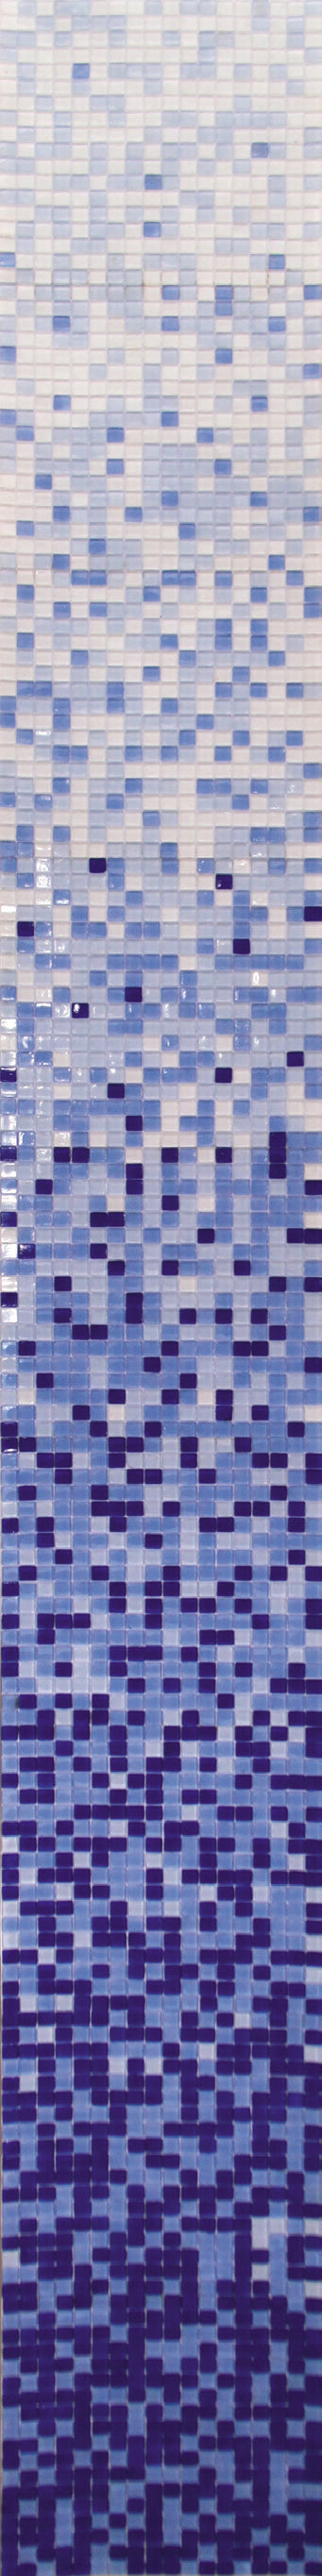 mir alma gradients 0_6 inch de 32 wall and floor mosaic distributed by surface group natural materials